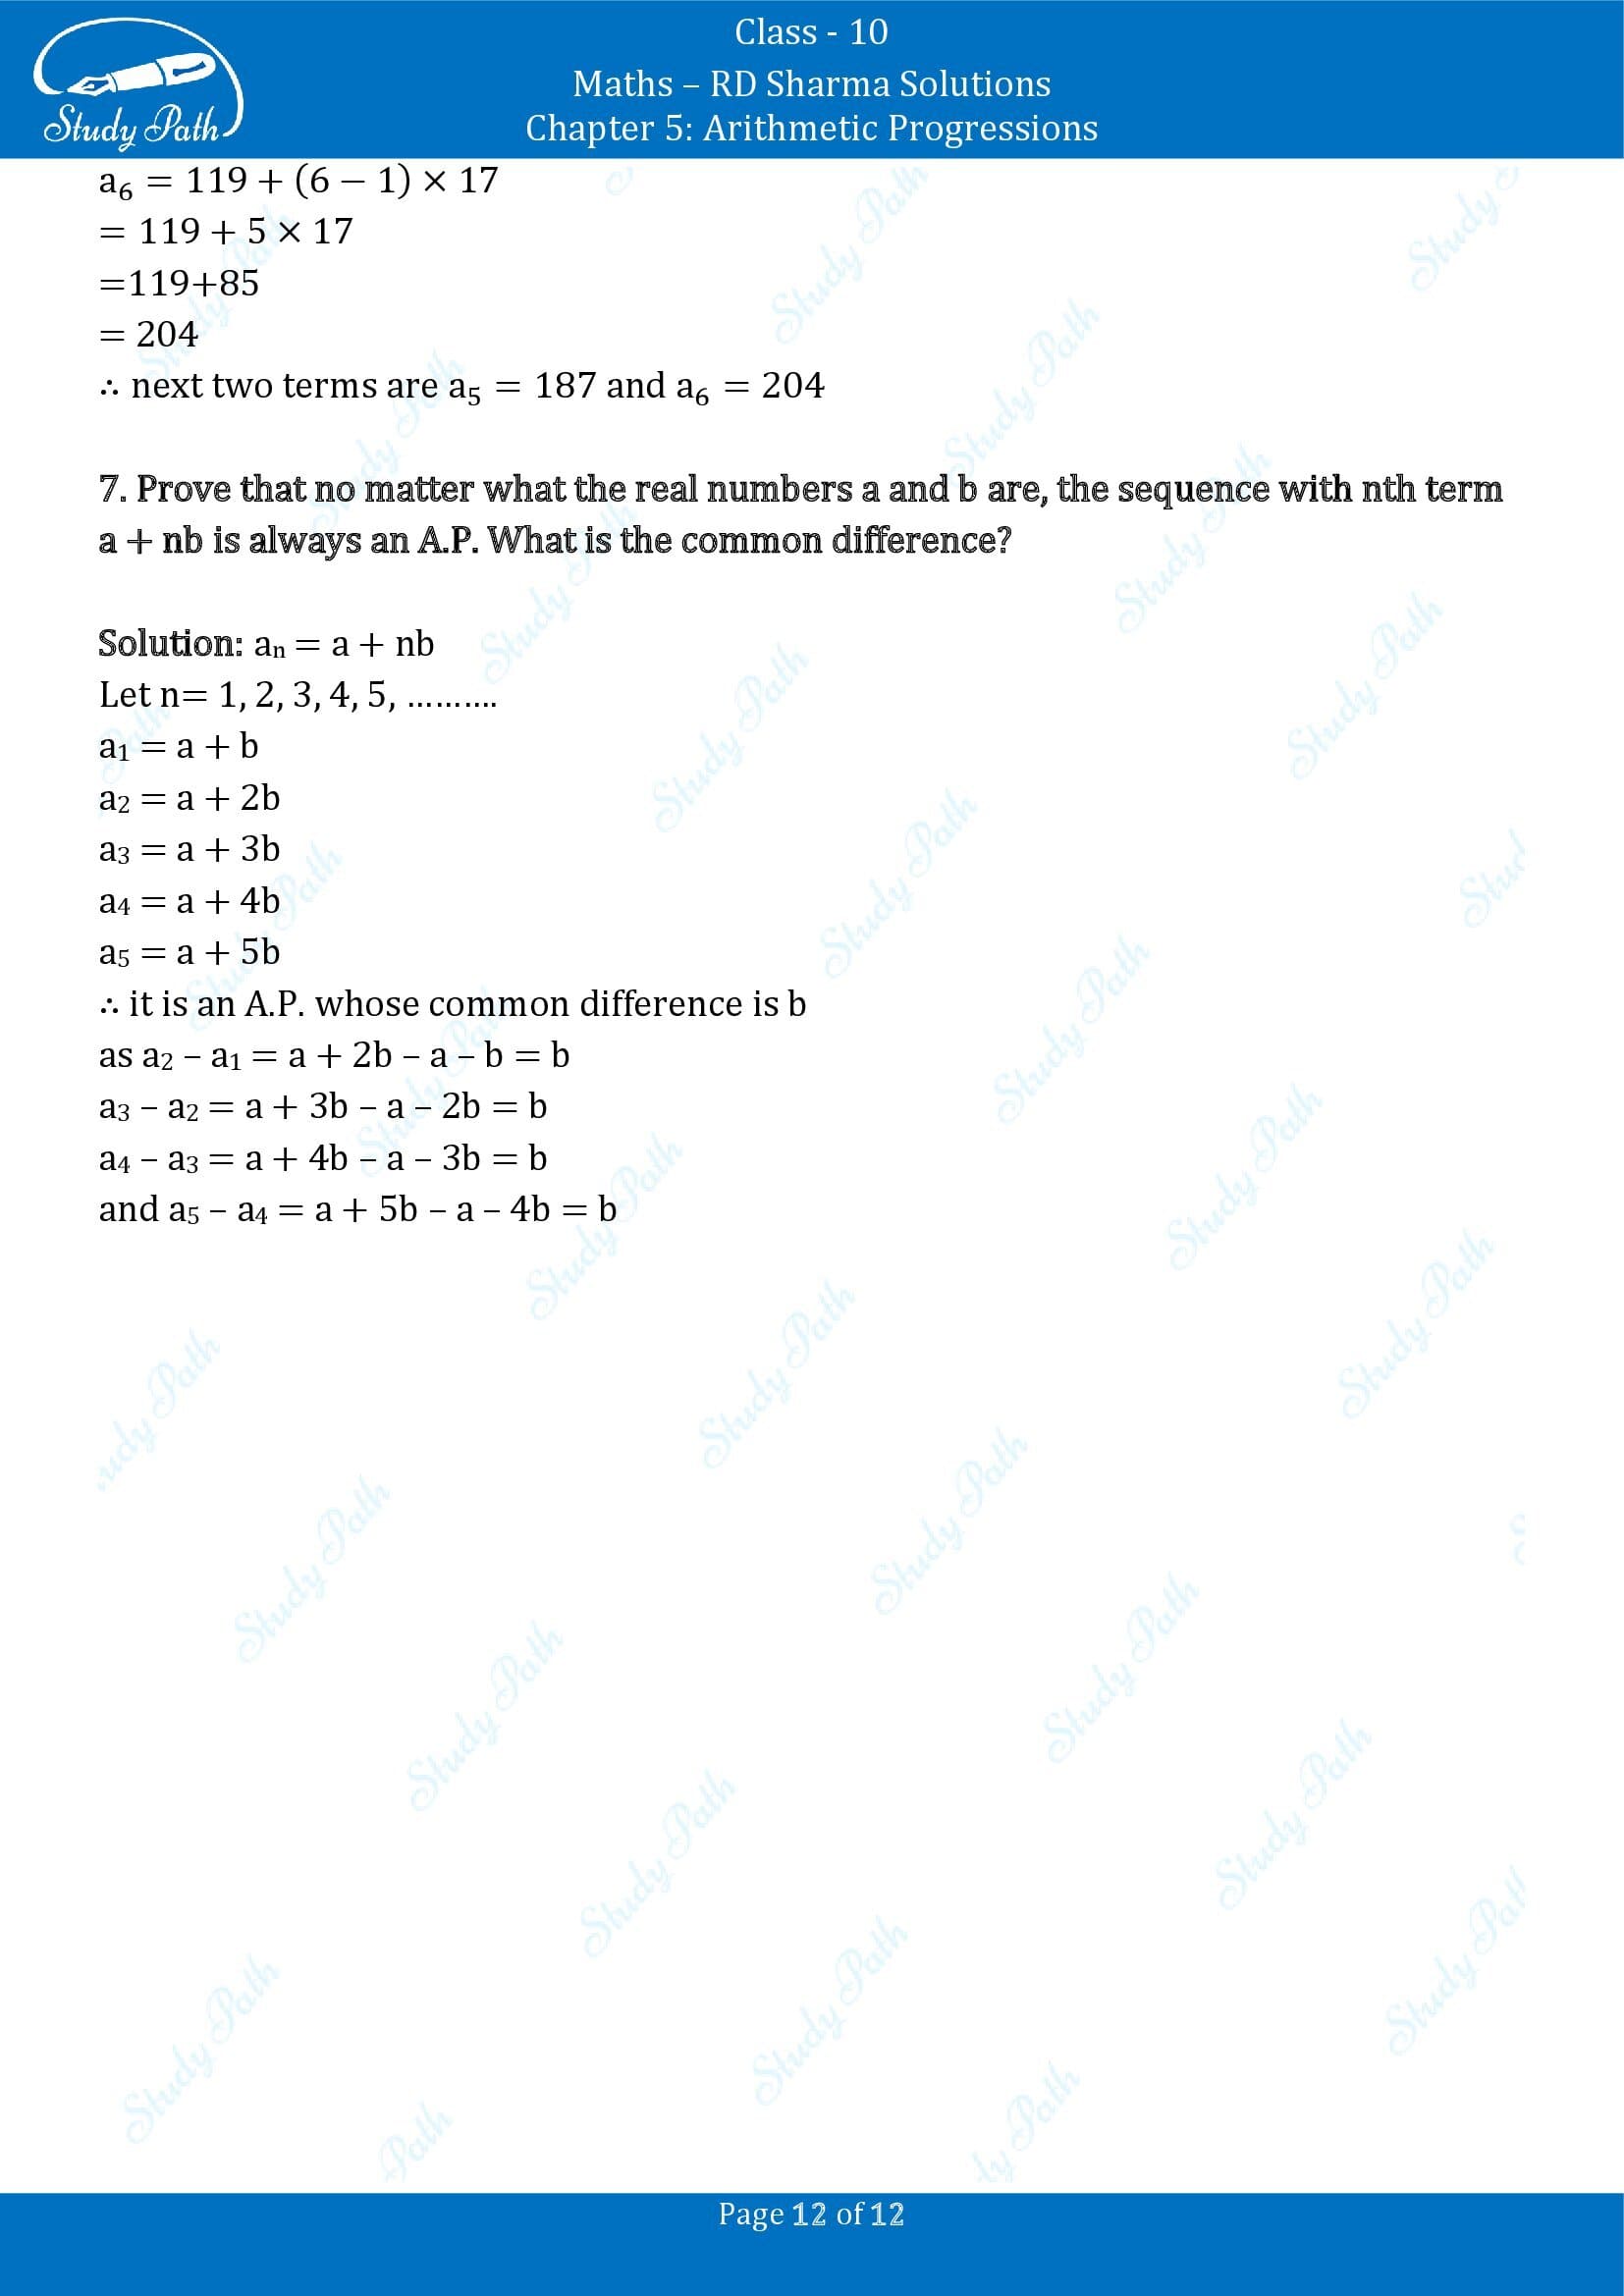 RD Sharma Solutions Class 10 Chapter 5 Arithmetic Progressions Exercise 5.3 00012